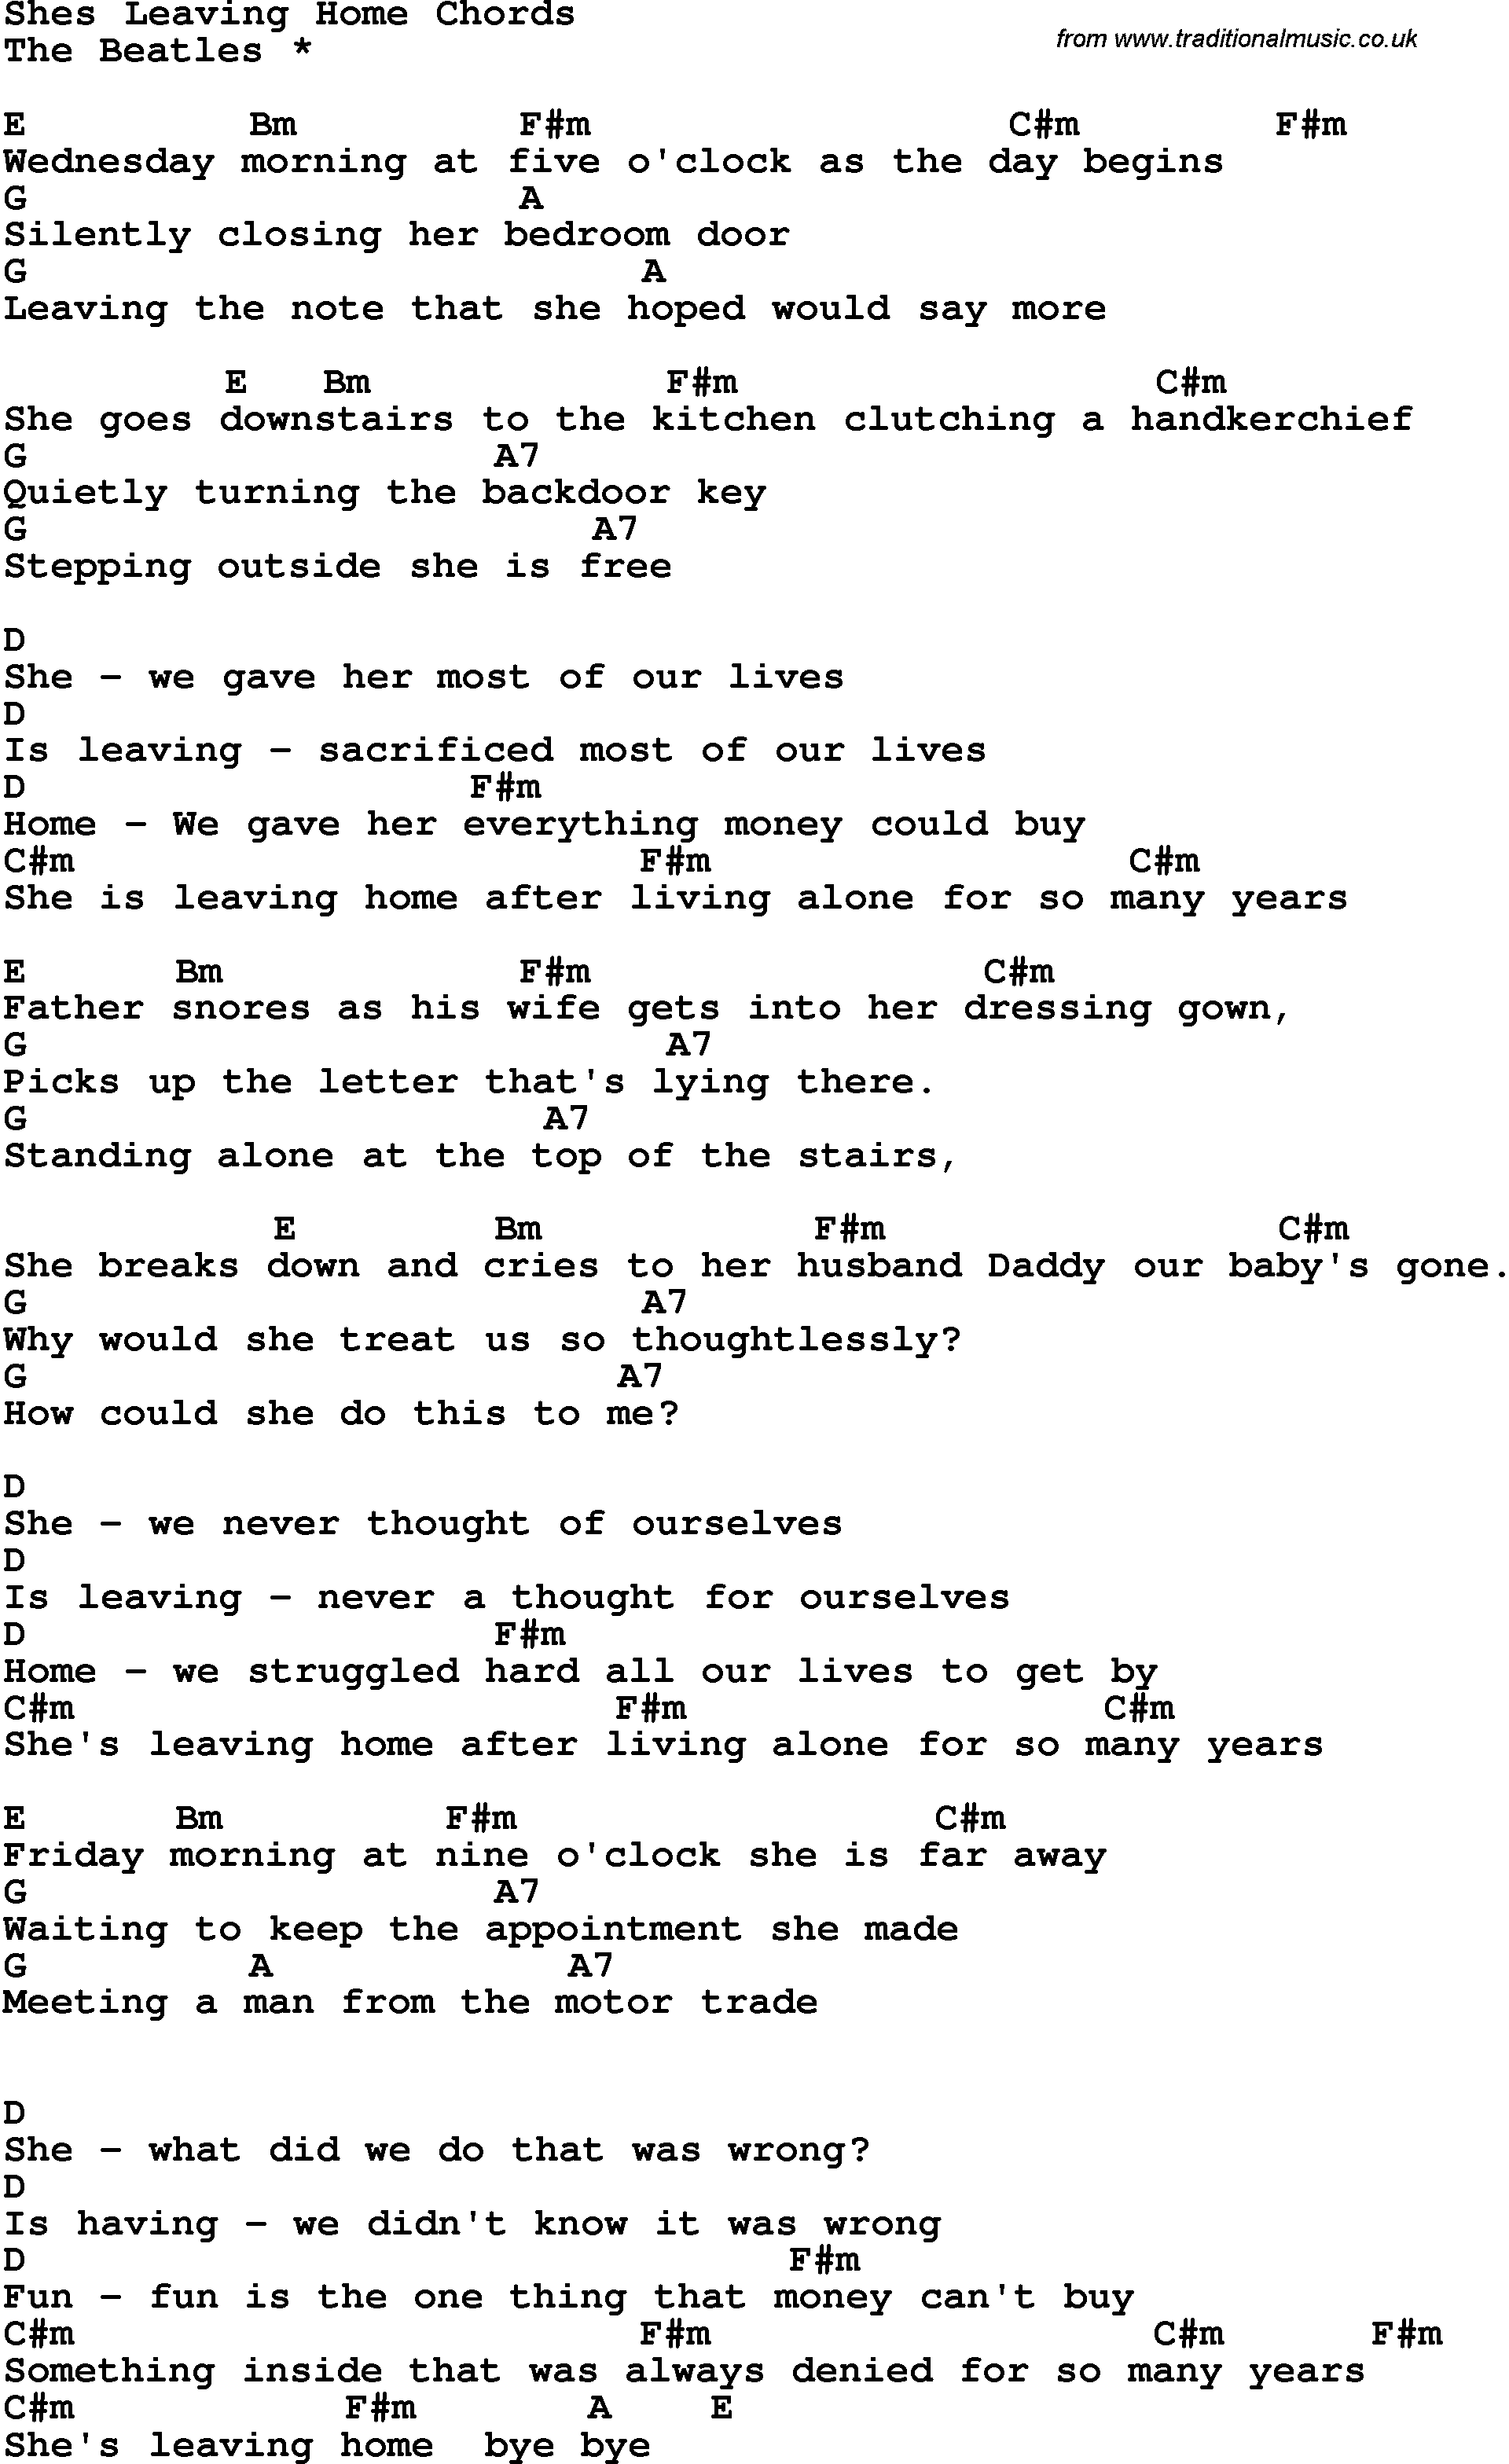 Song Lyrics with guitar chords for She's Leaving Home